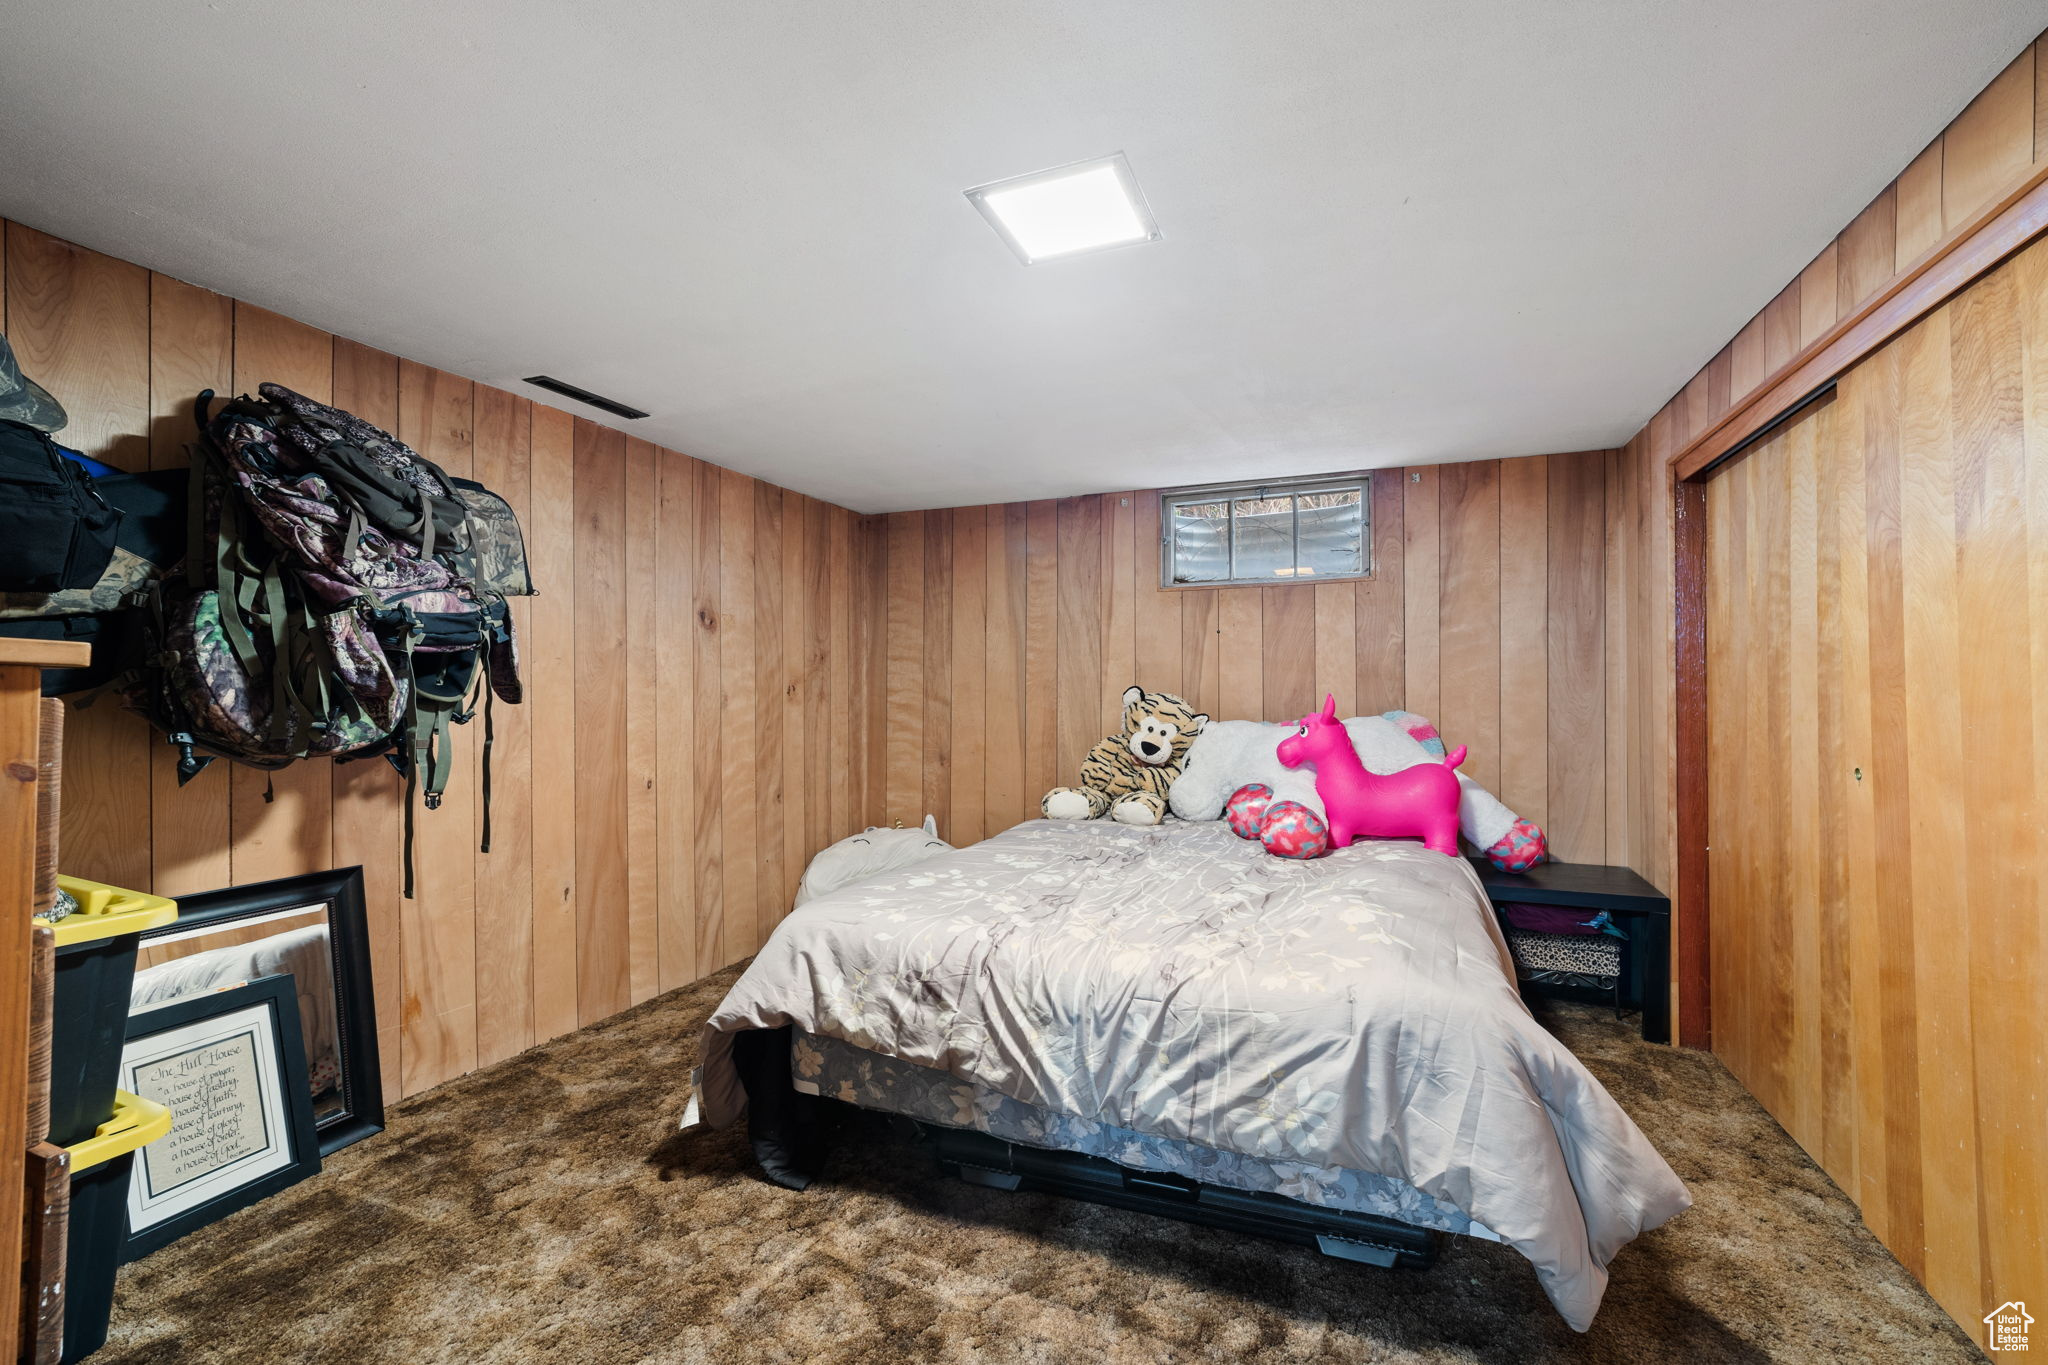 Carpeted bedroom featuring wooden walls